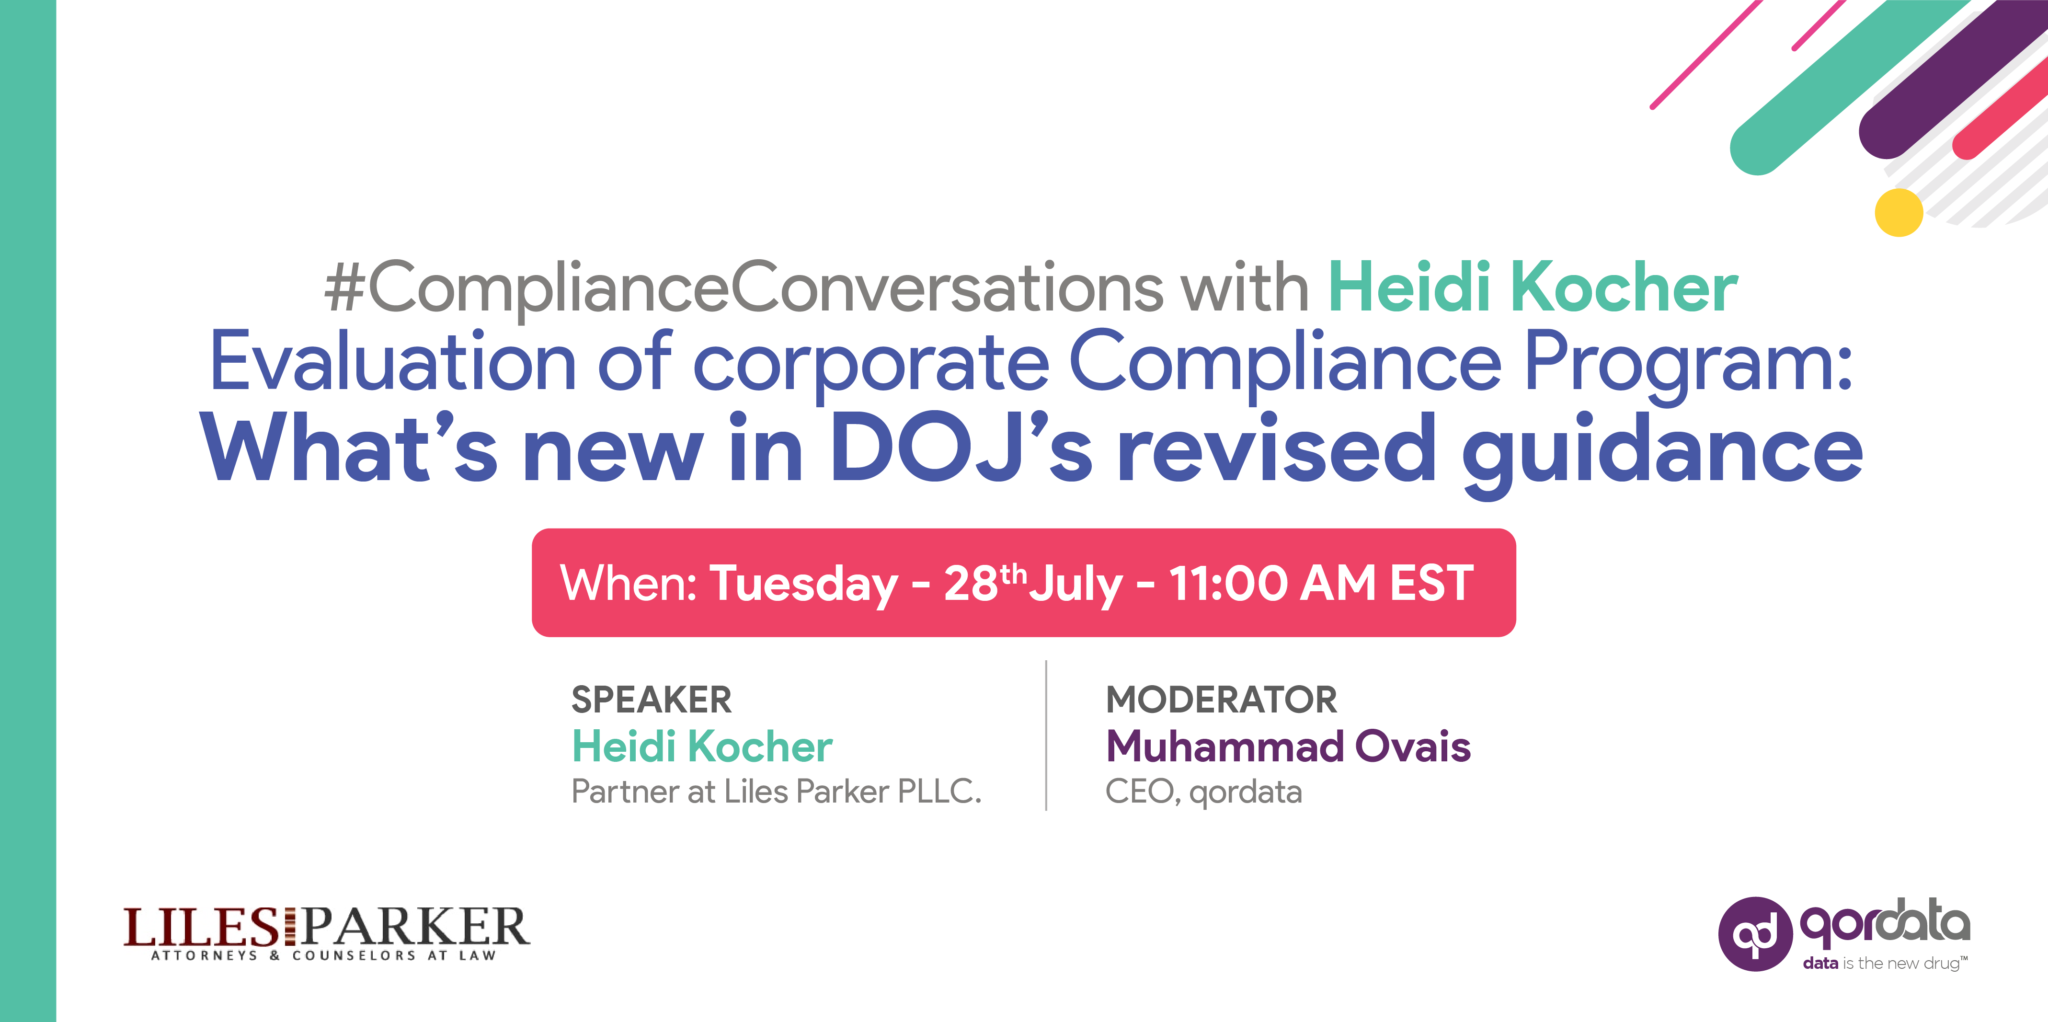 Compliance Conversations with Heidi Kocher on DOJ's revised guidelines